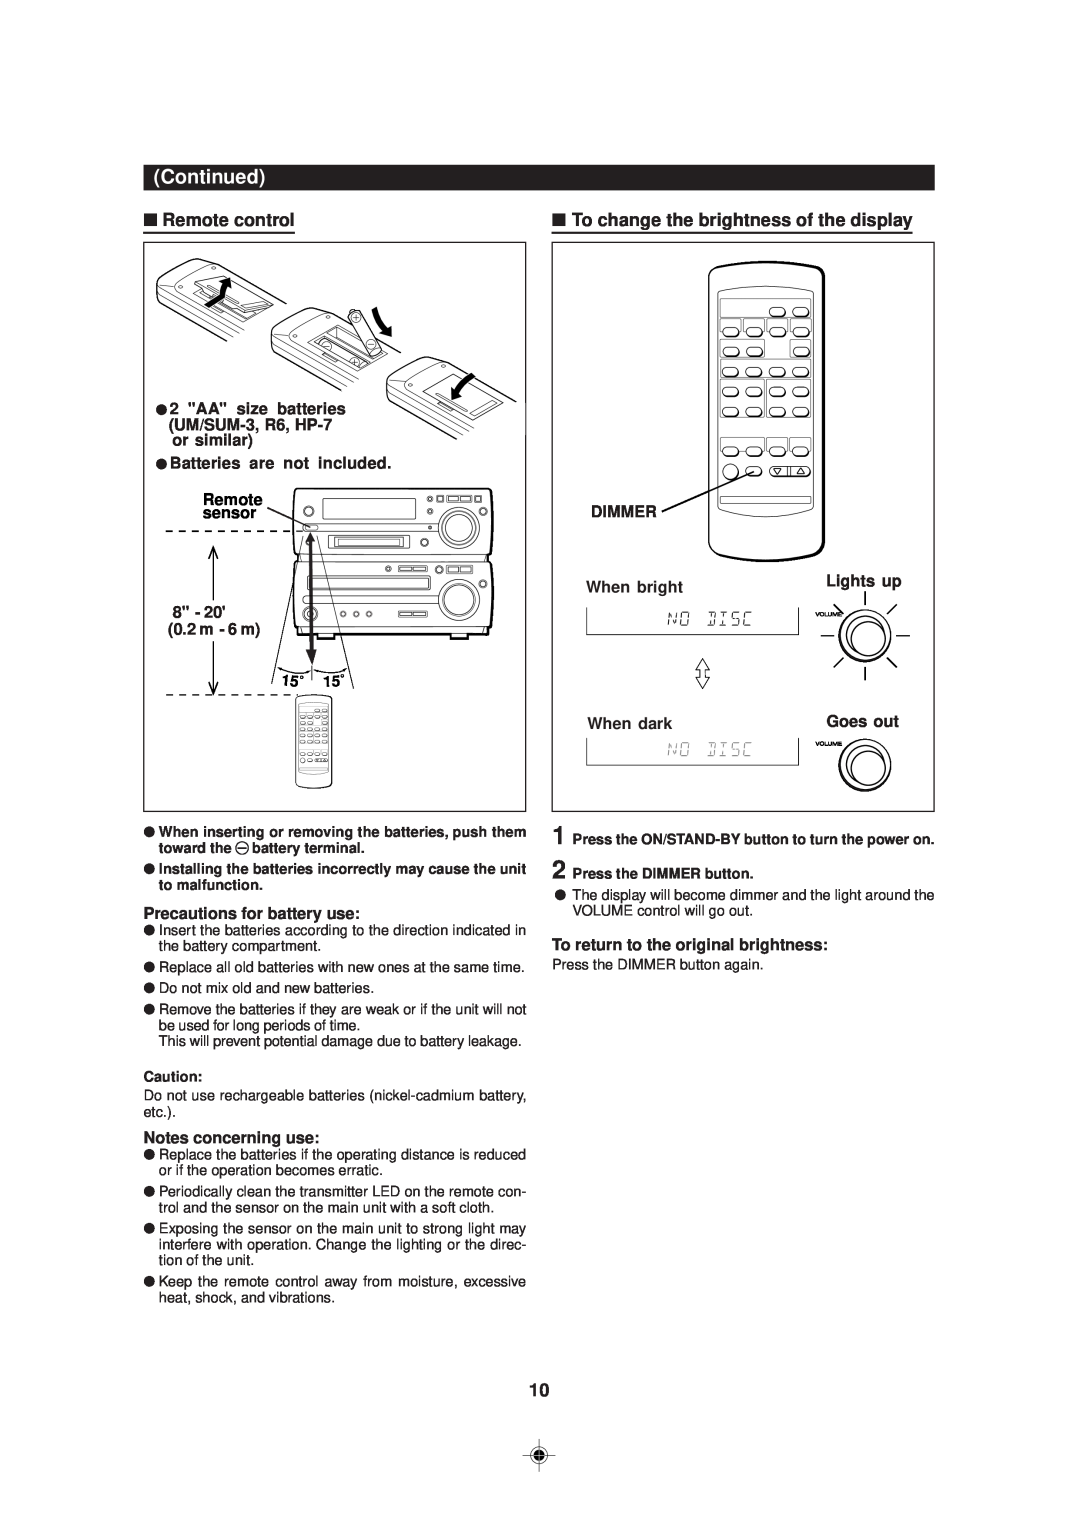 Sharp MD-MX30 MD operation manual To change the brightness of the display, Continued, Remote control 